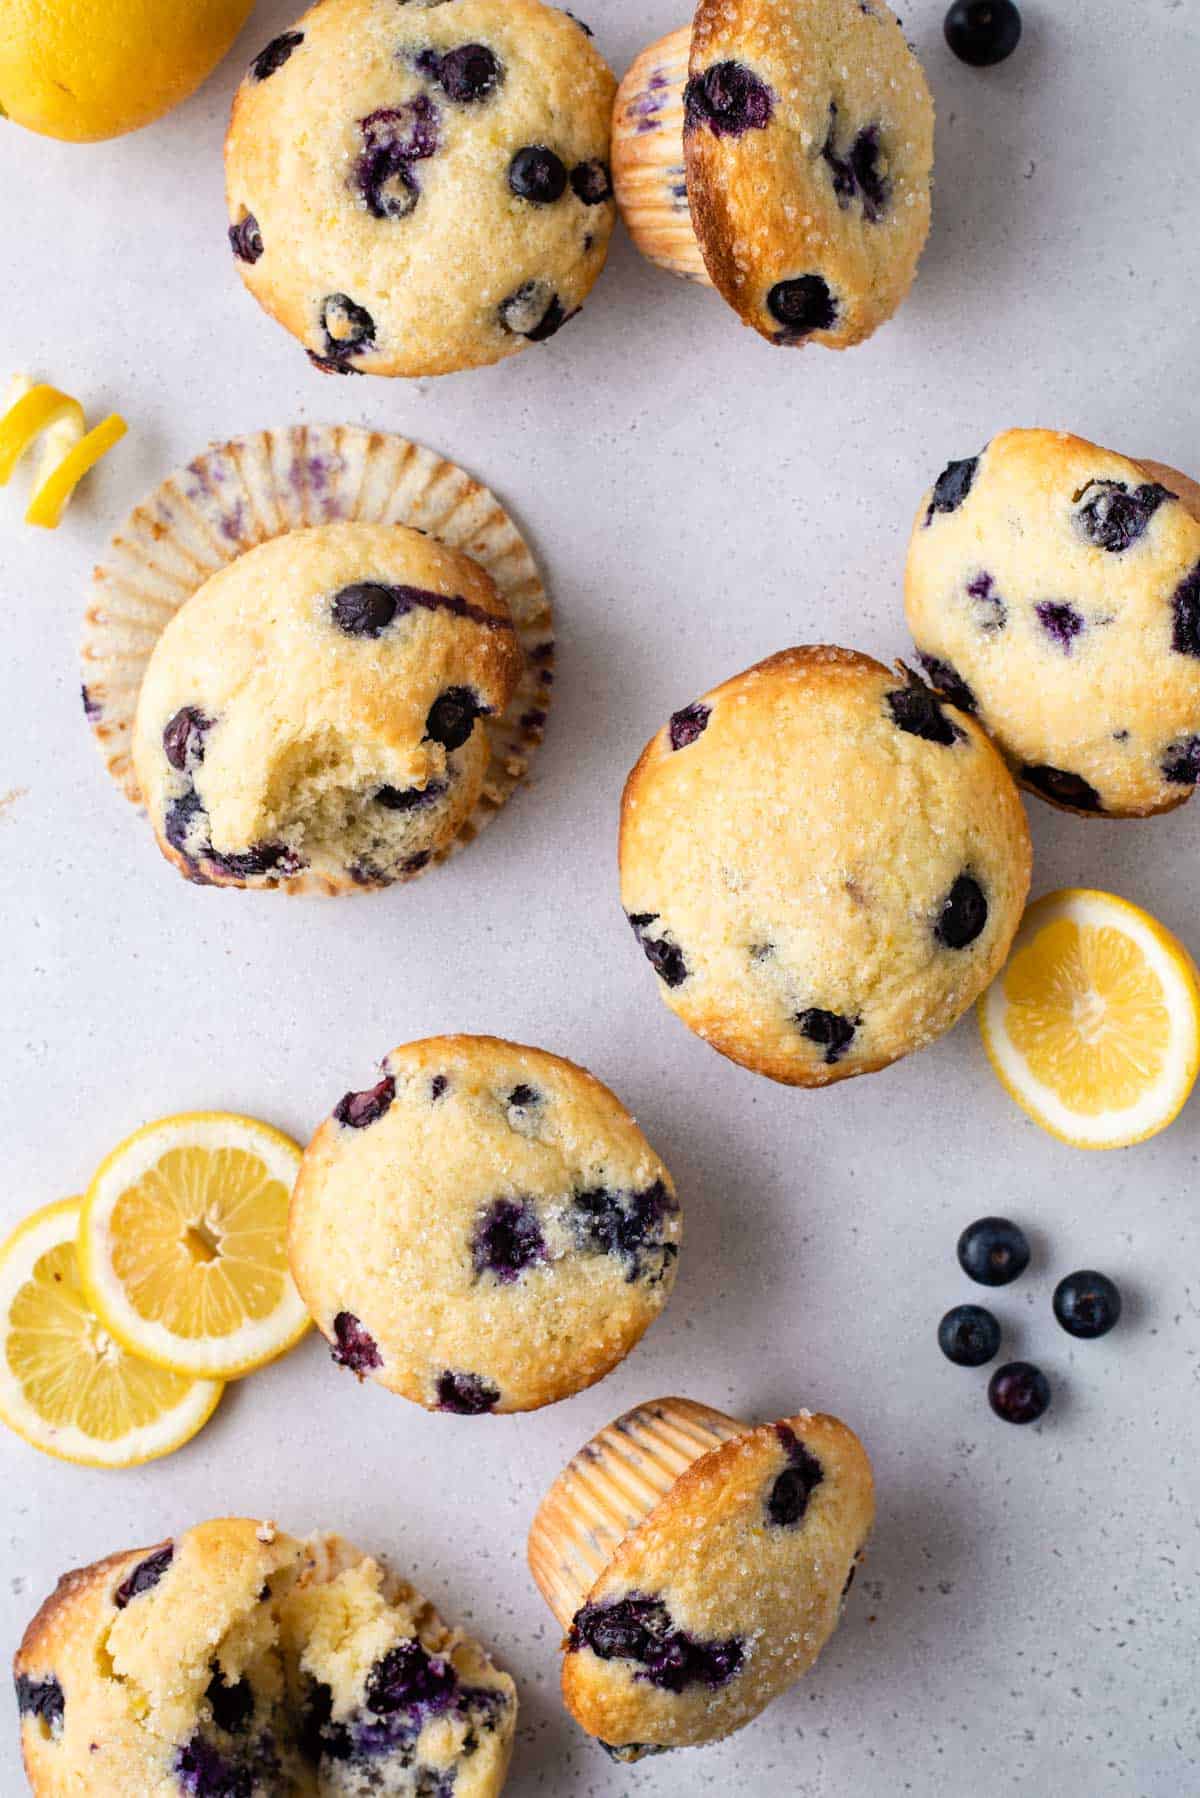 several lemon blueberry muffins arranged on a counter, some whole and some with muffin liners open and bites out, surrounded by lemon slices and whole fresh blueberries